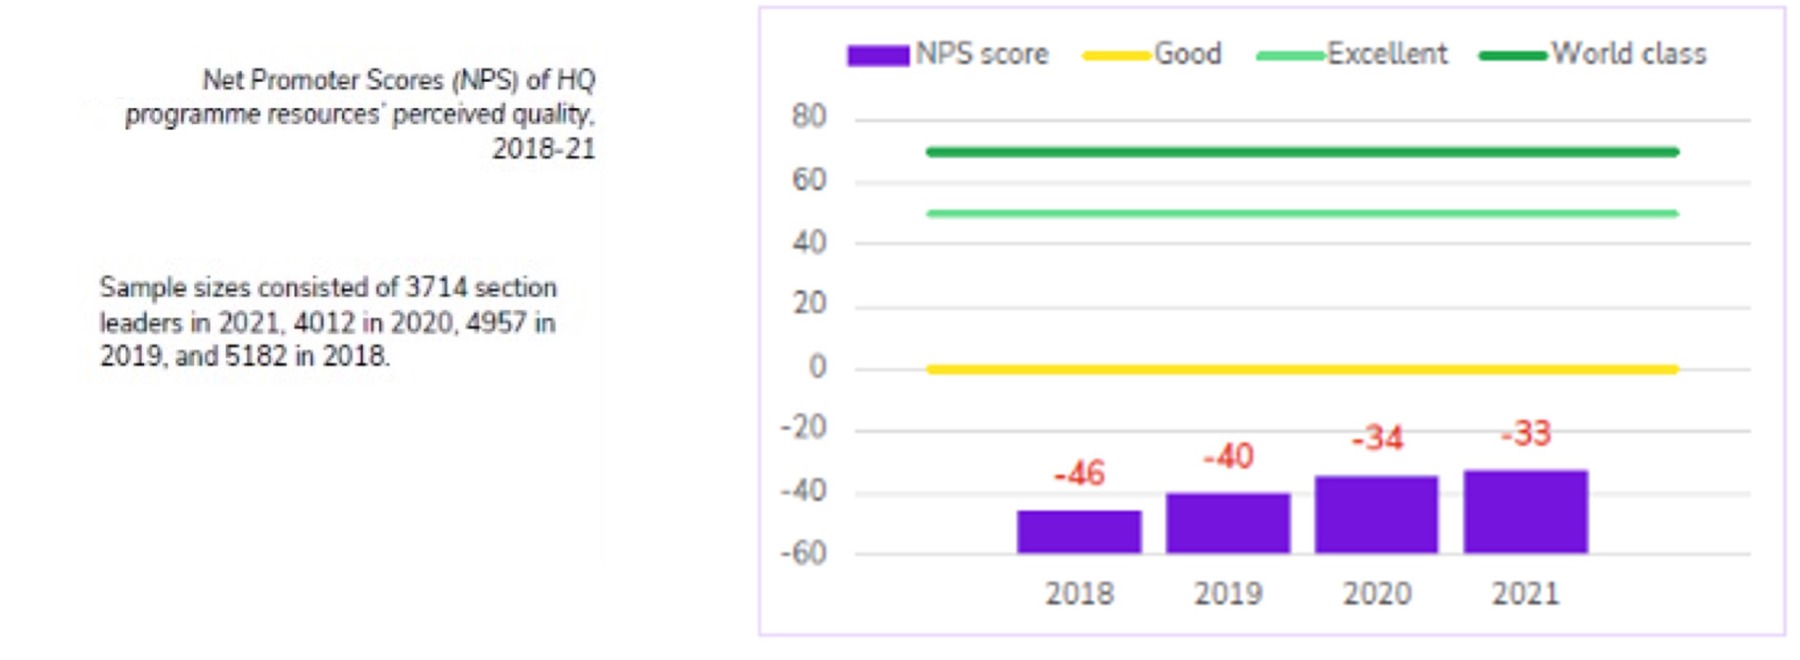 Bar graph showing the Net Promoter Scores of HQ programme resources' perceived quality, 2018-21